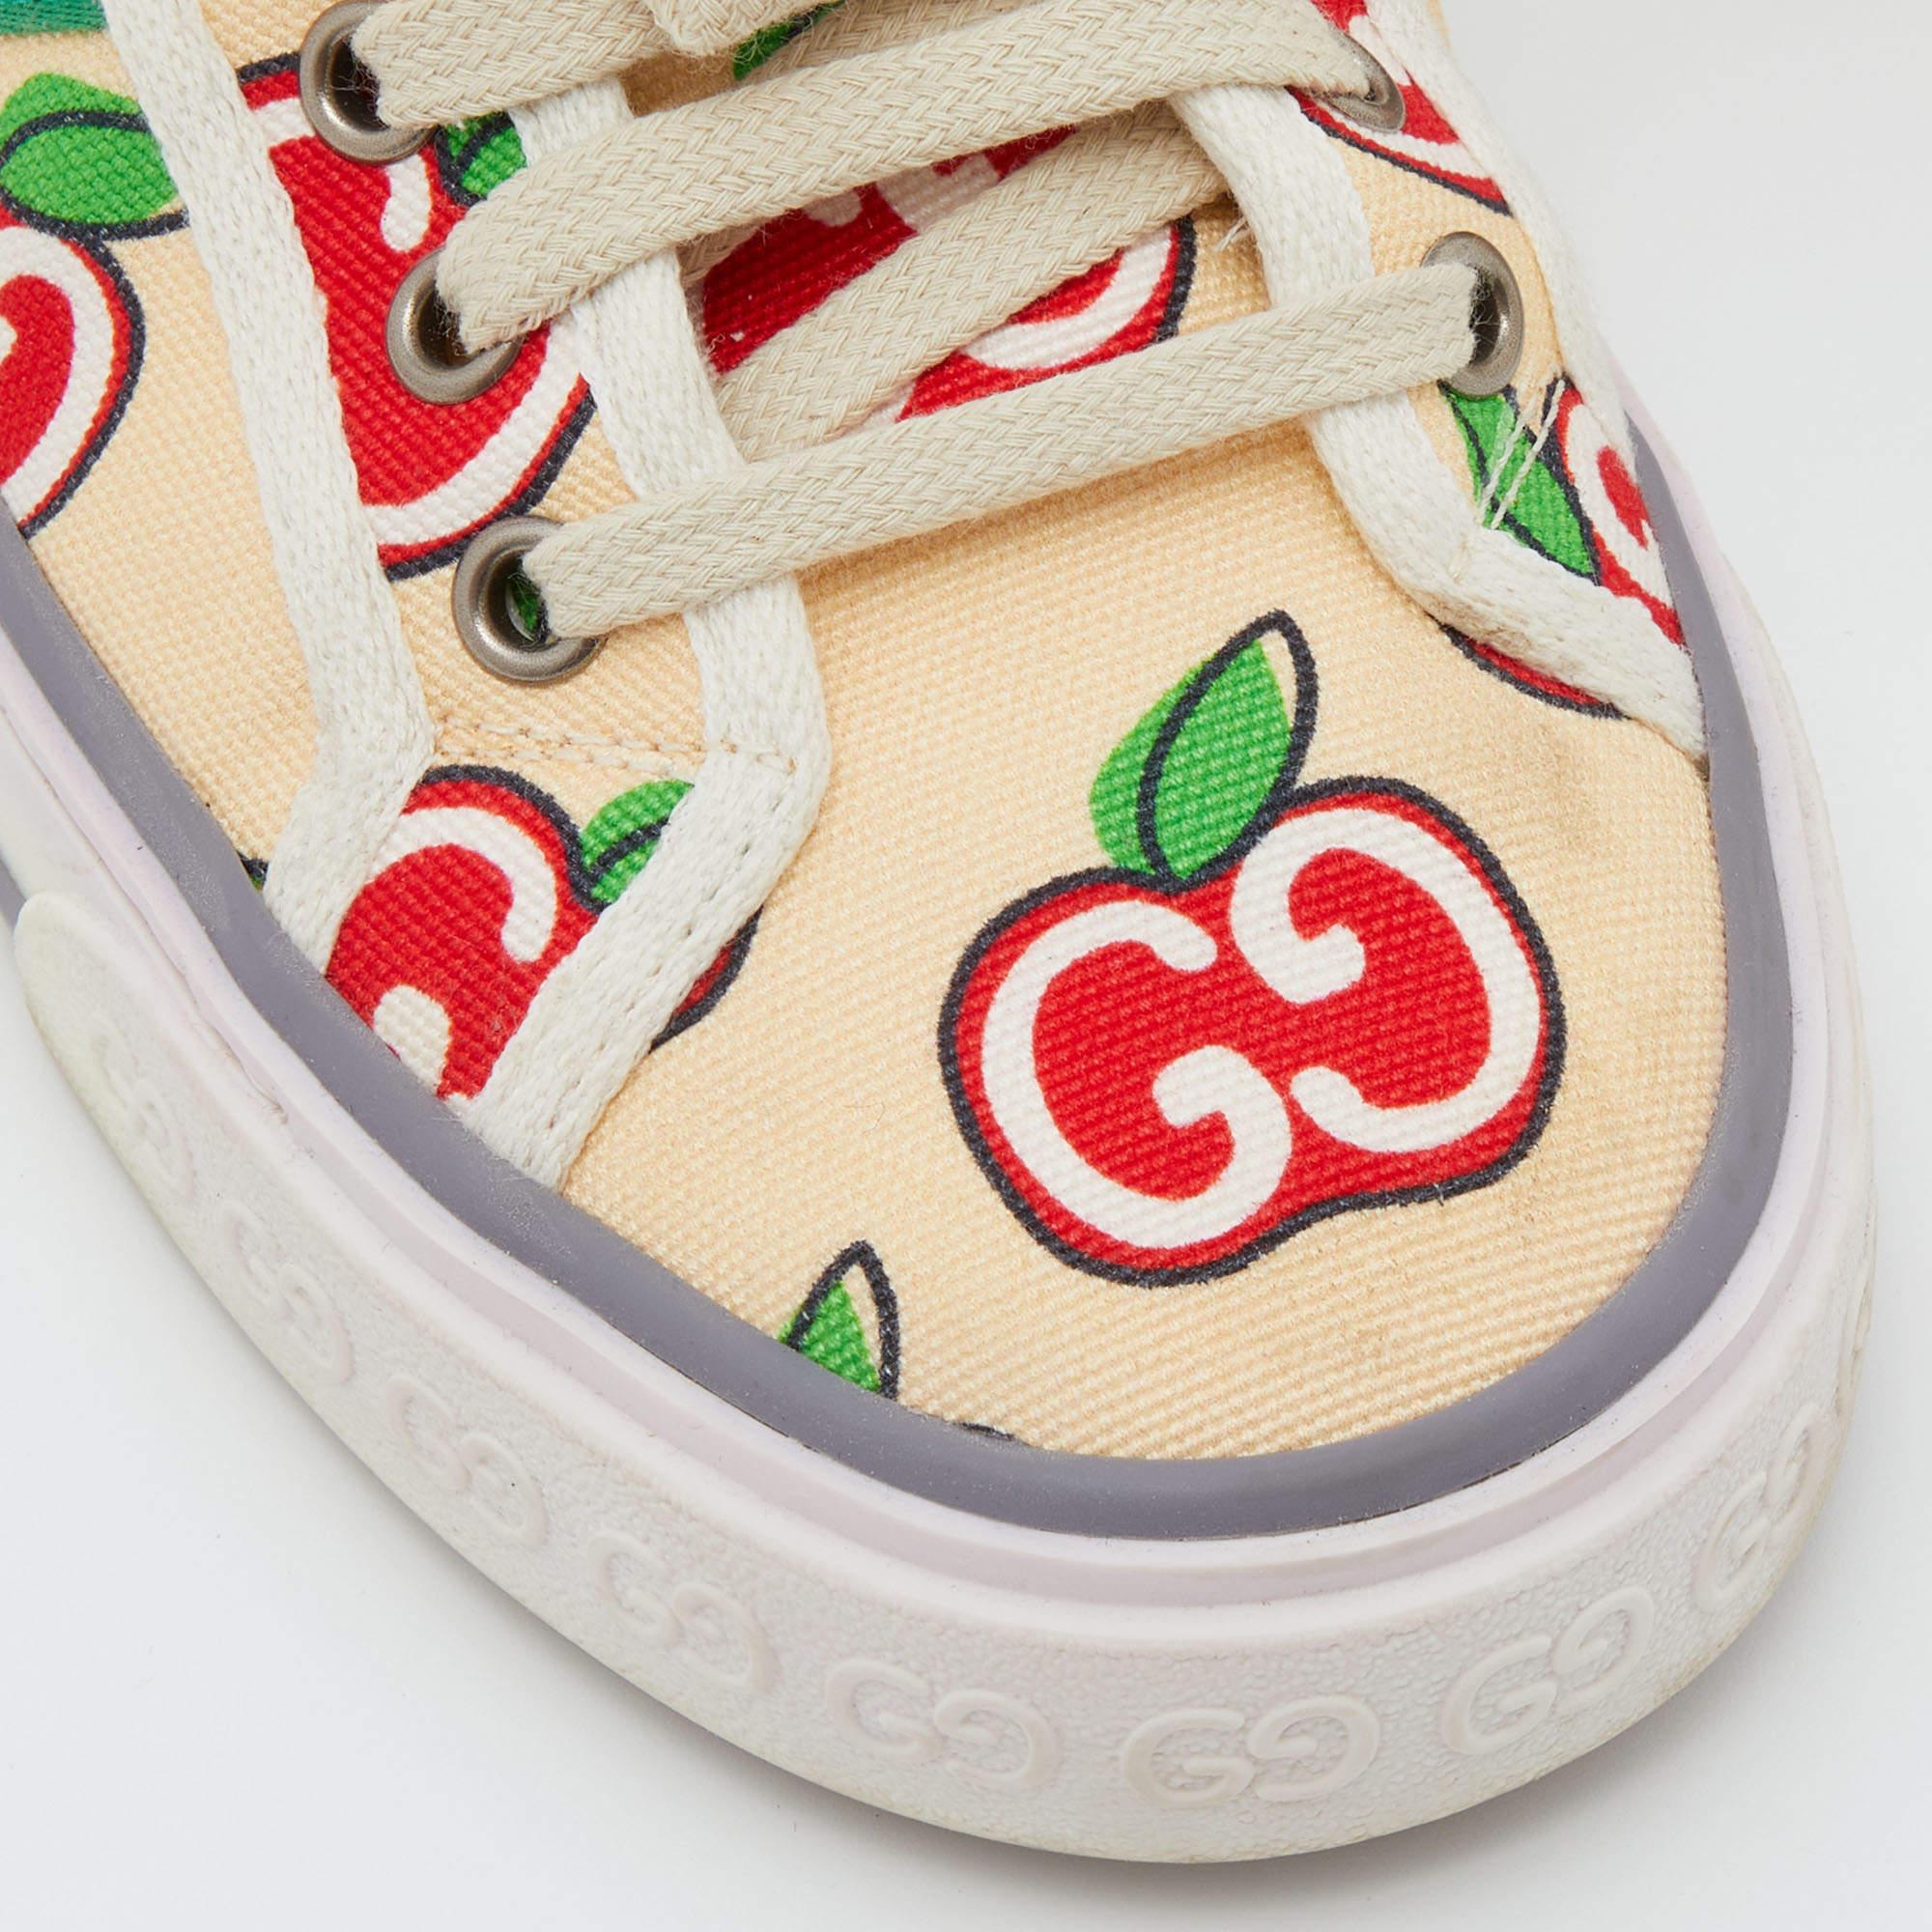 Gucci Multicolor Canvas Tennis 1977 GG Apple Print Low Top Sneakers Size 38 1